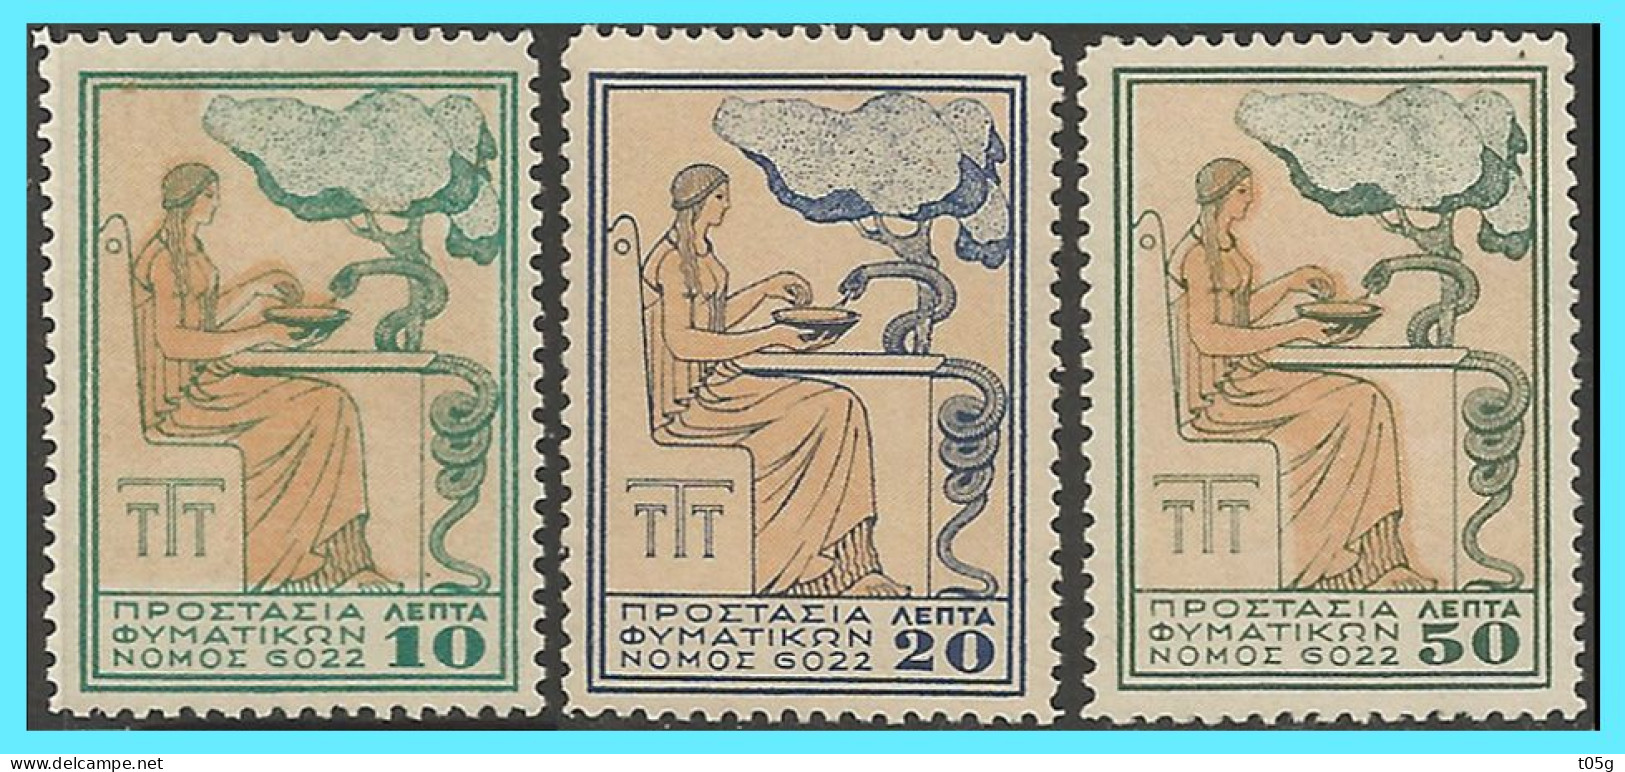 GREECE- GRECE - HELLAS CHARITY STAMPS 1934: "Protection For Tuberculosis Patients" Without " ELLAS Complet Set MNH** - Beneficiencia (Sellos De)